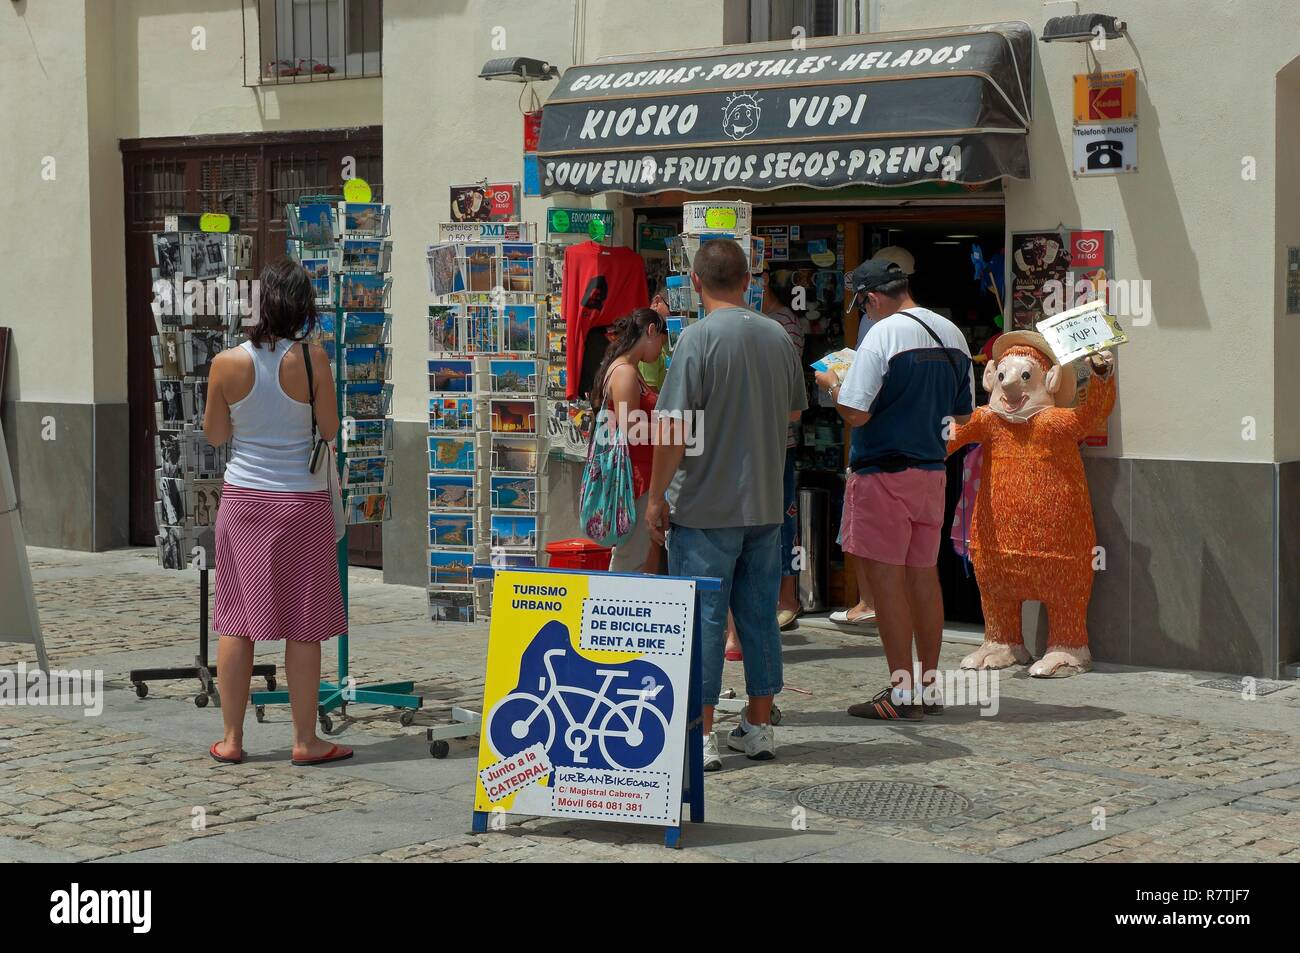 Souvenirs store and tourists, Cadiz, Region of Andalusia, Spain, Europe. Stock Photo